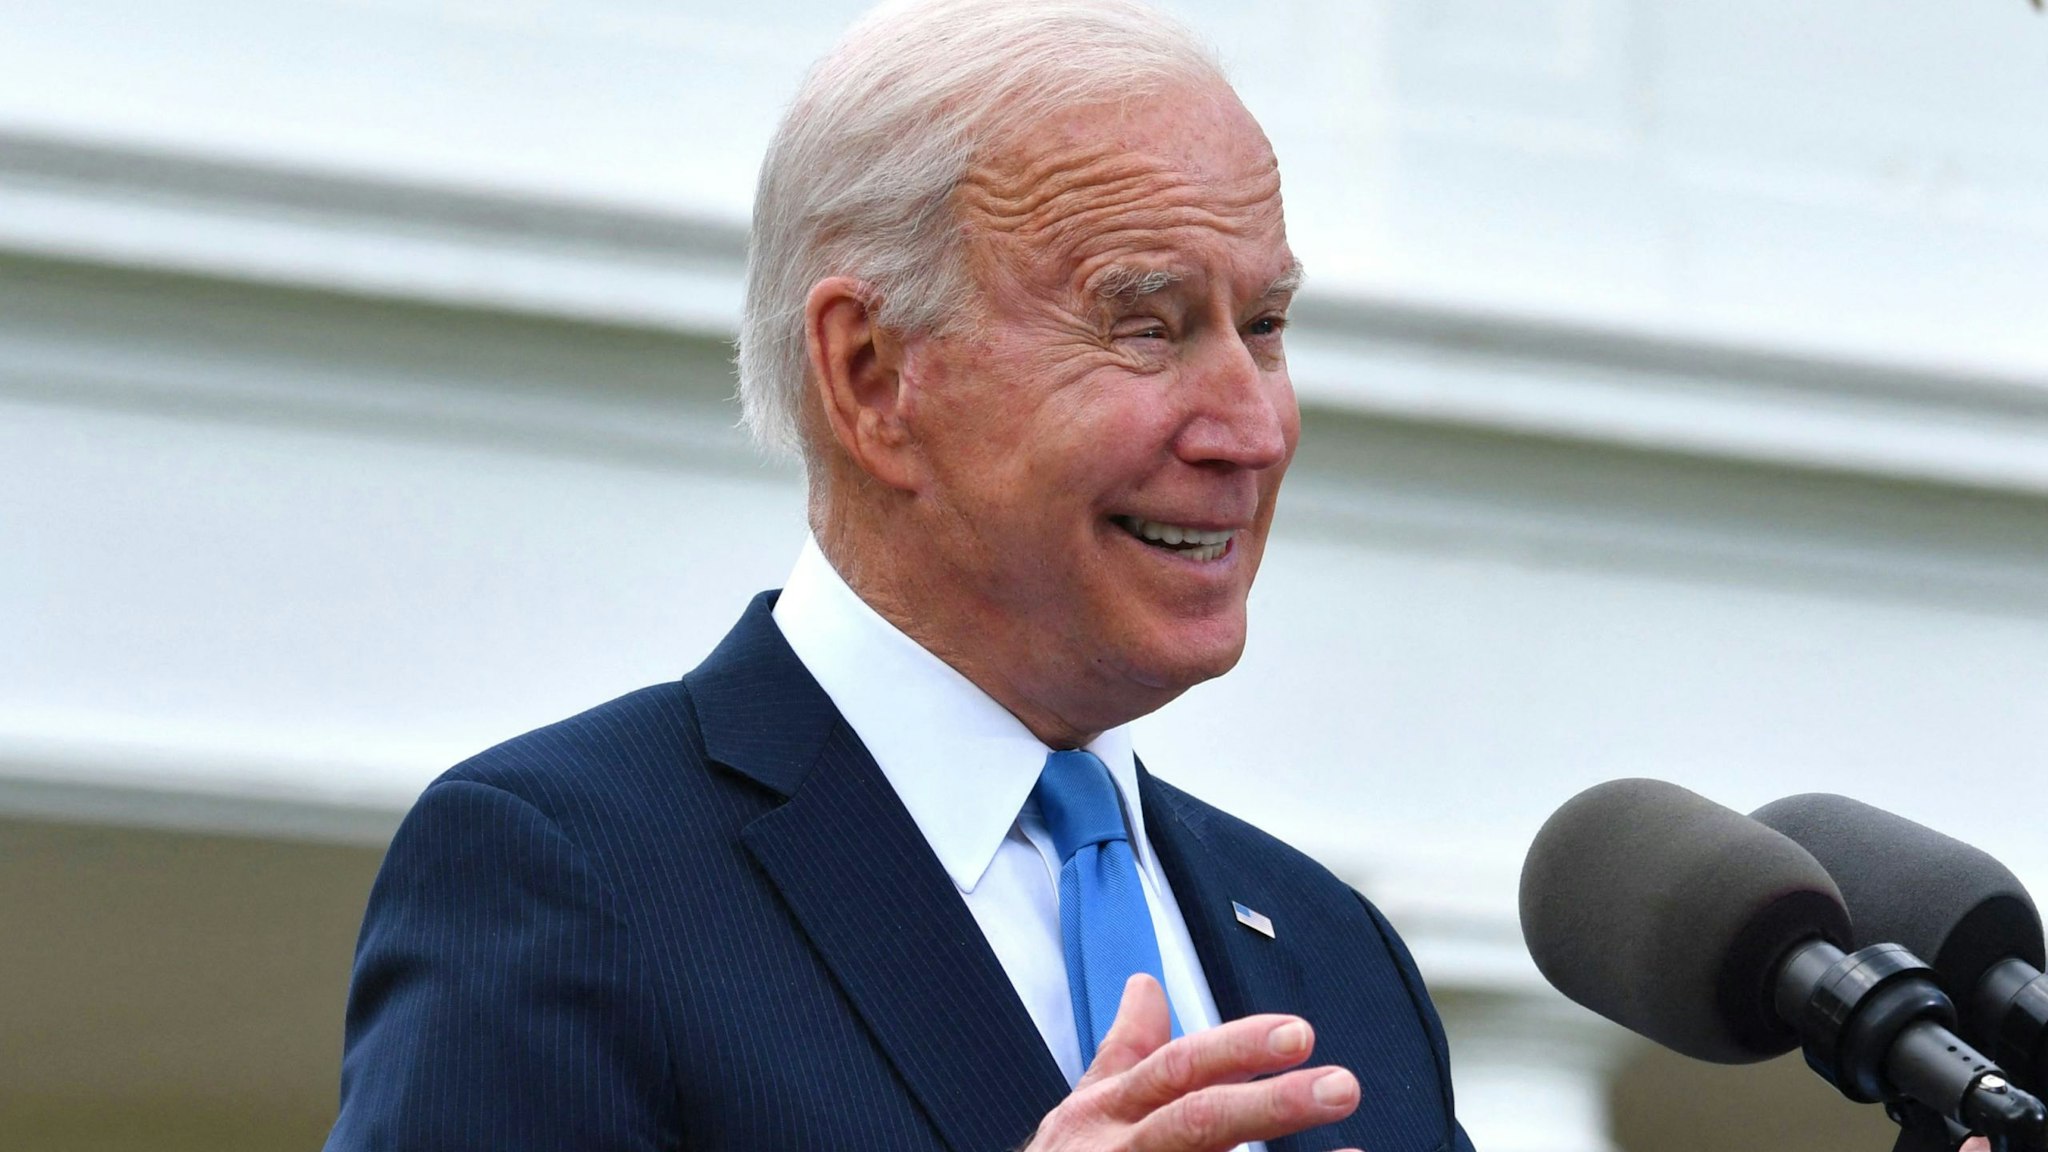 US President Joe Biden delivers remarks on Covid-19 response and the vaccination program, from the Rose Garden of the White House, Washington, DC on May 13, 2021.